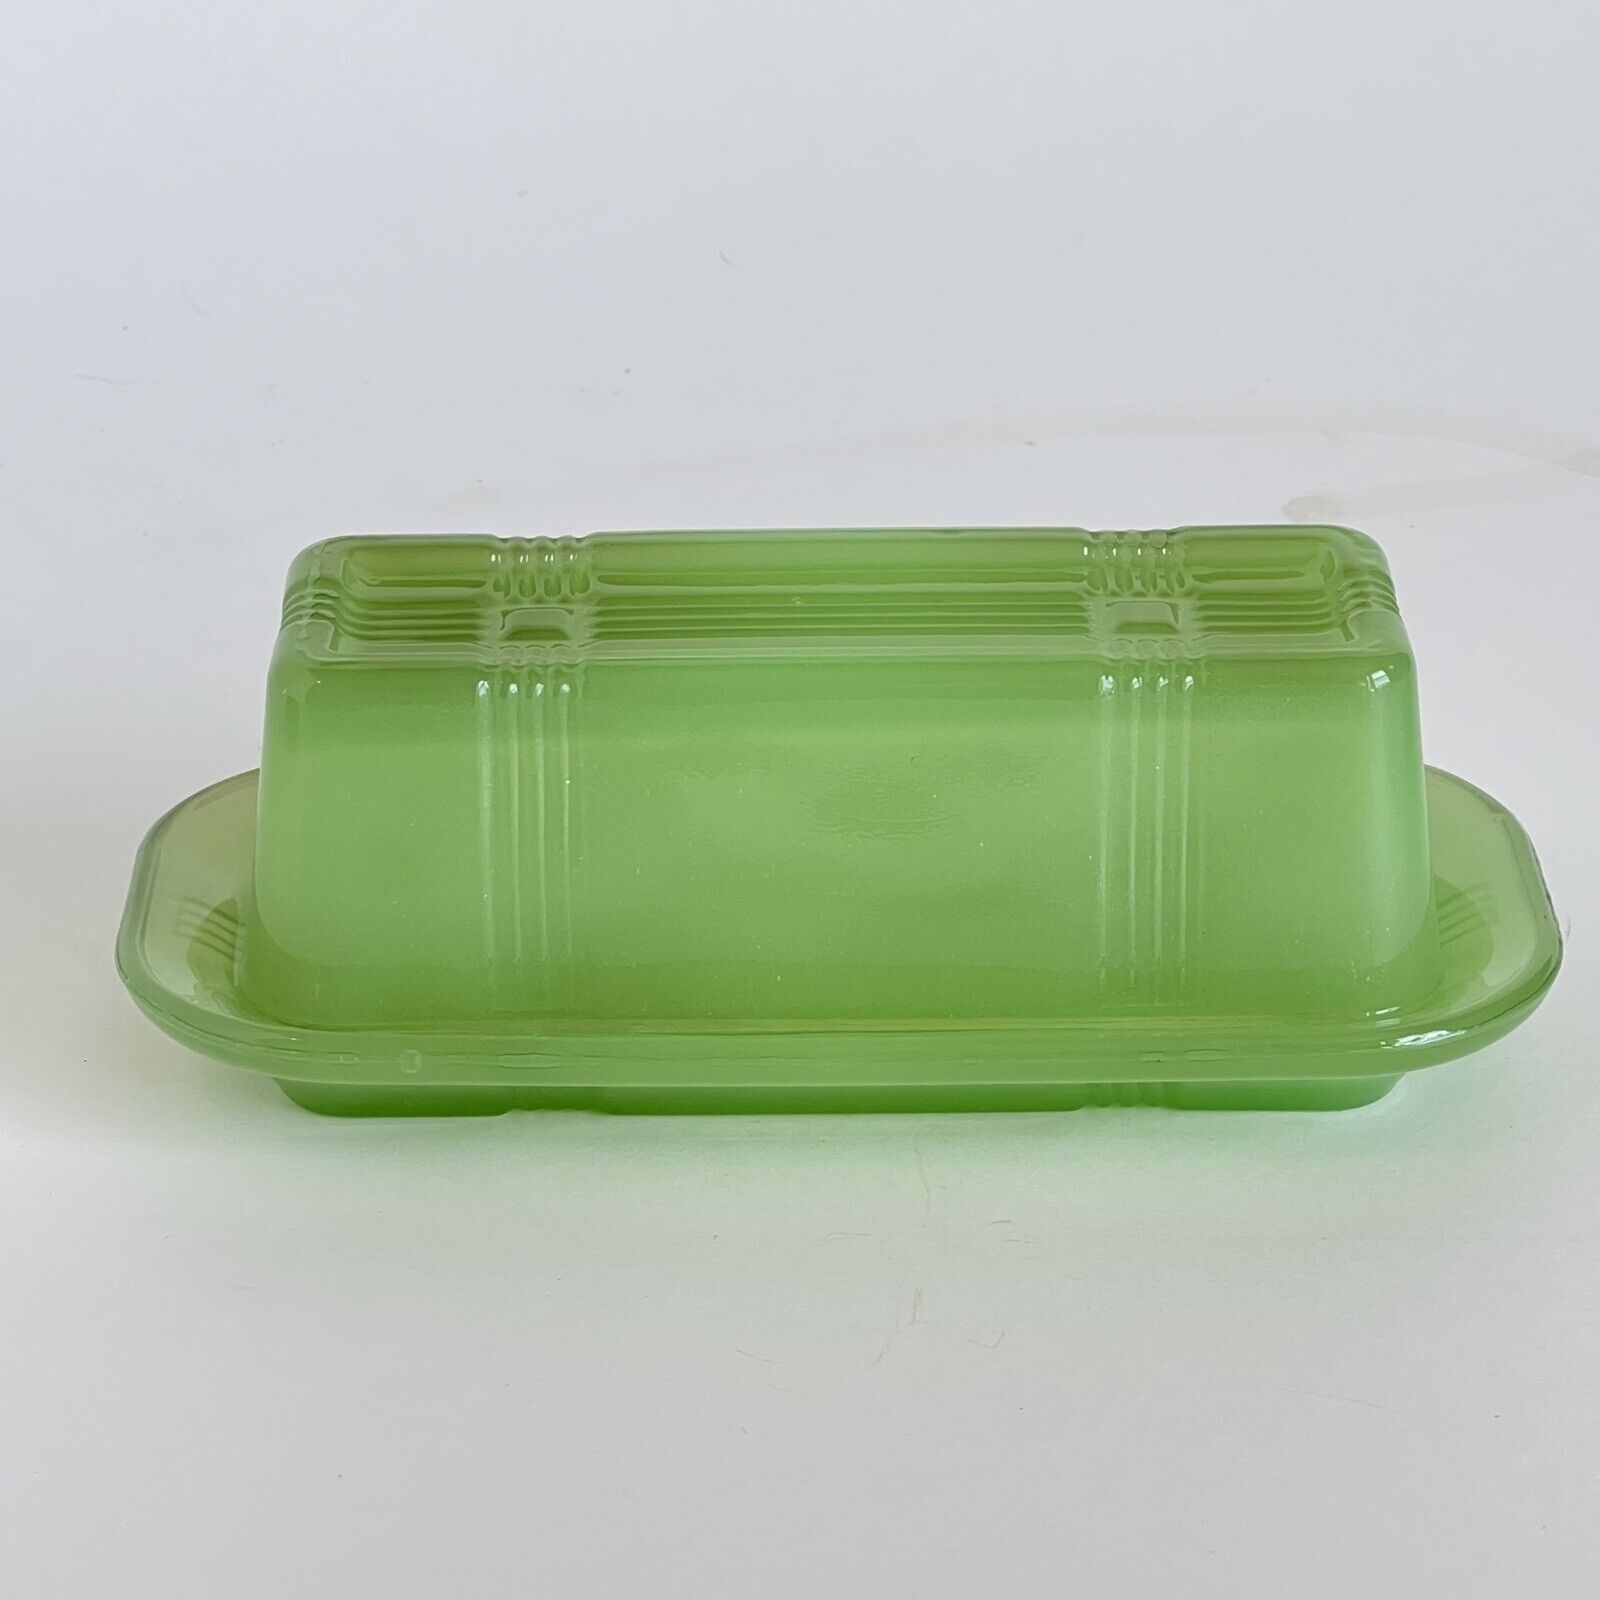 JADEITE GREEN GLASS CRISS-CROSS PATTERN BUTTER DISH  1 stick DISH with COVER